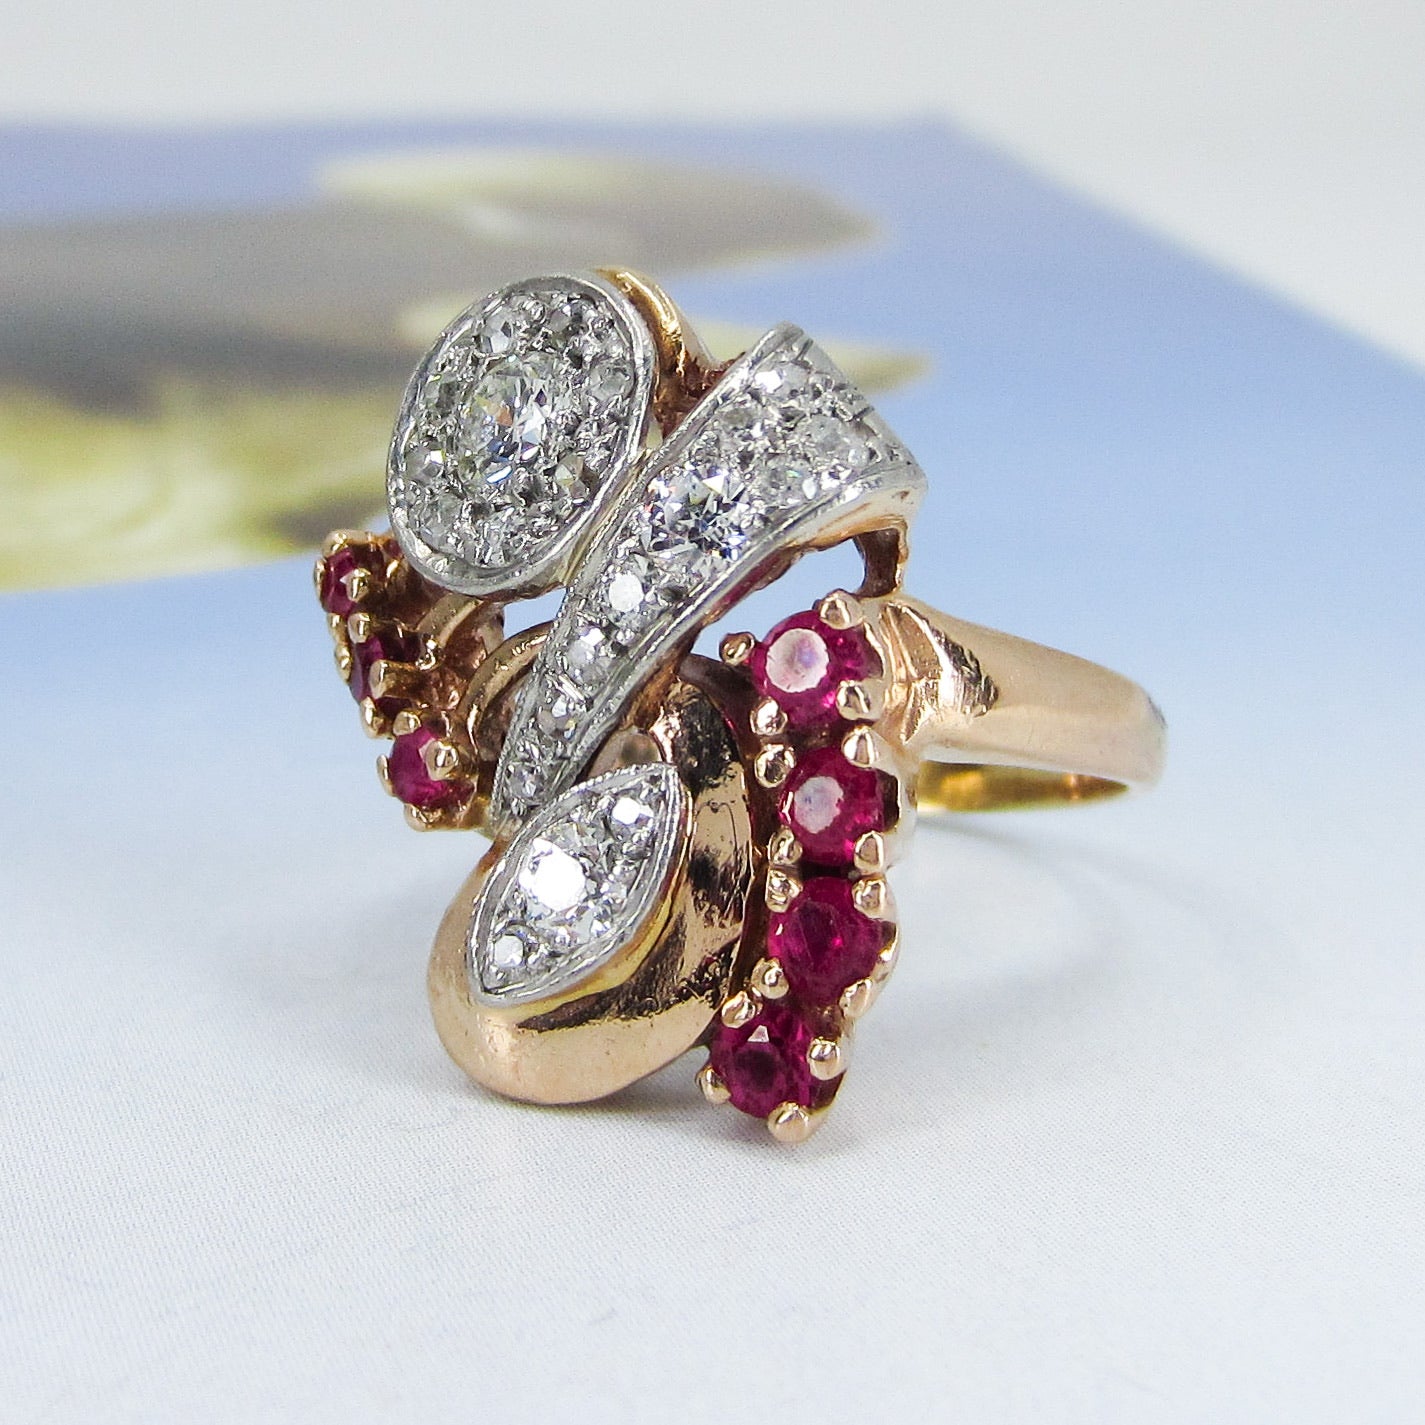 SOLD—Vintage Retro Old Hollywood Diamond and Ruby Ring 14k c. 1940